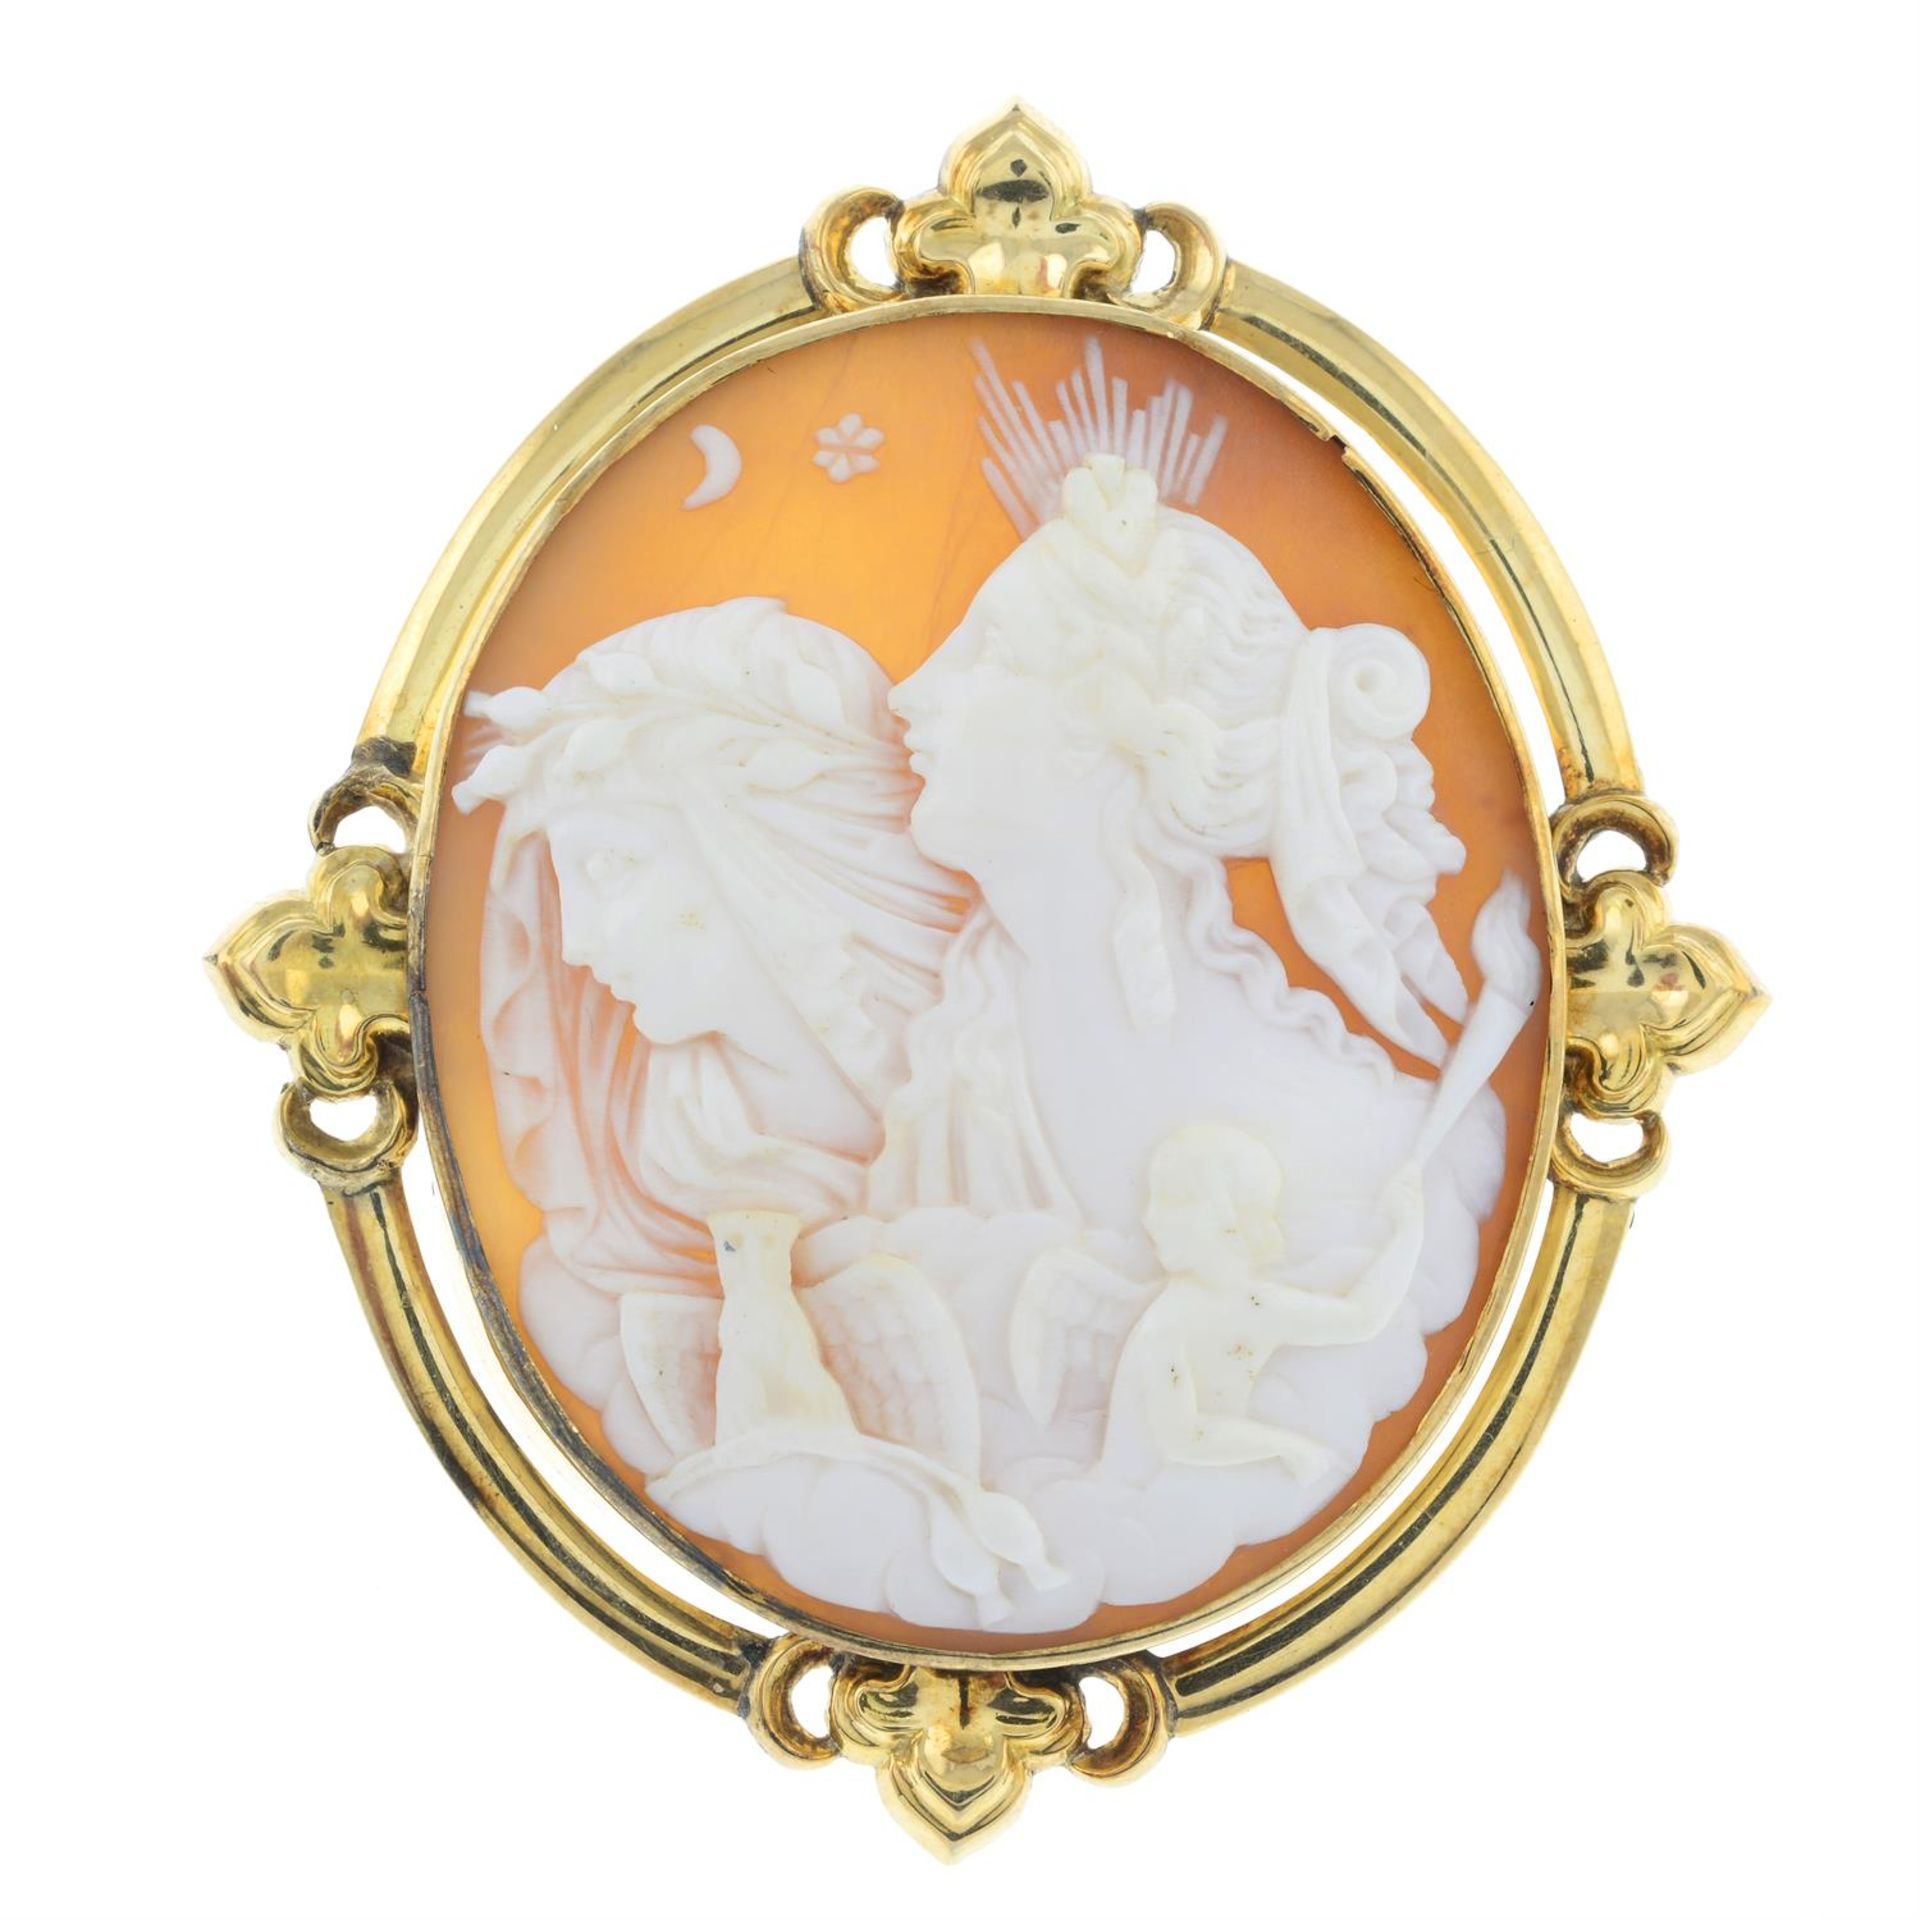 An early 20th century shell cameo brooch, depicting Eos and Nyx.